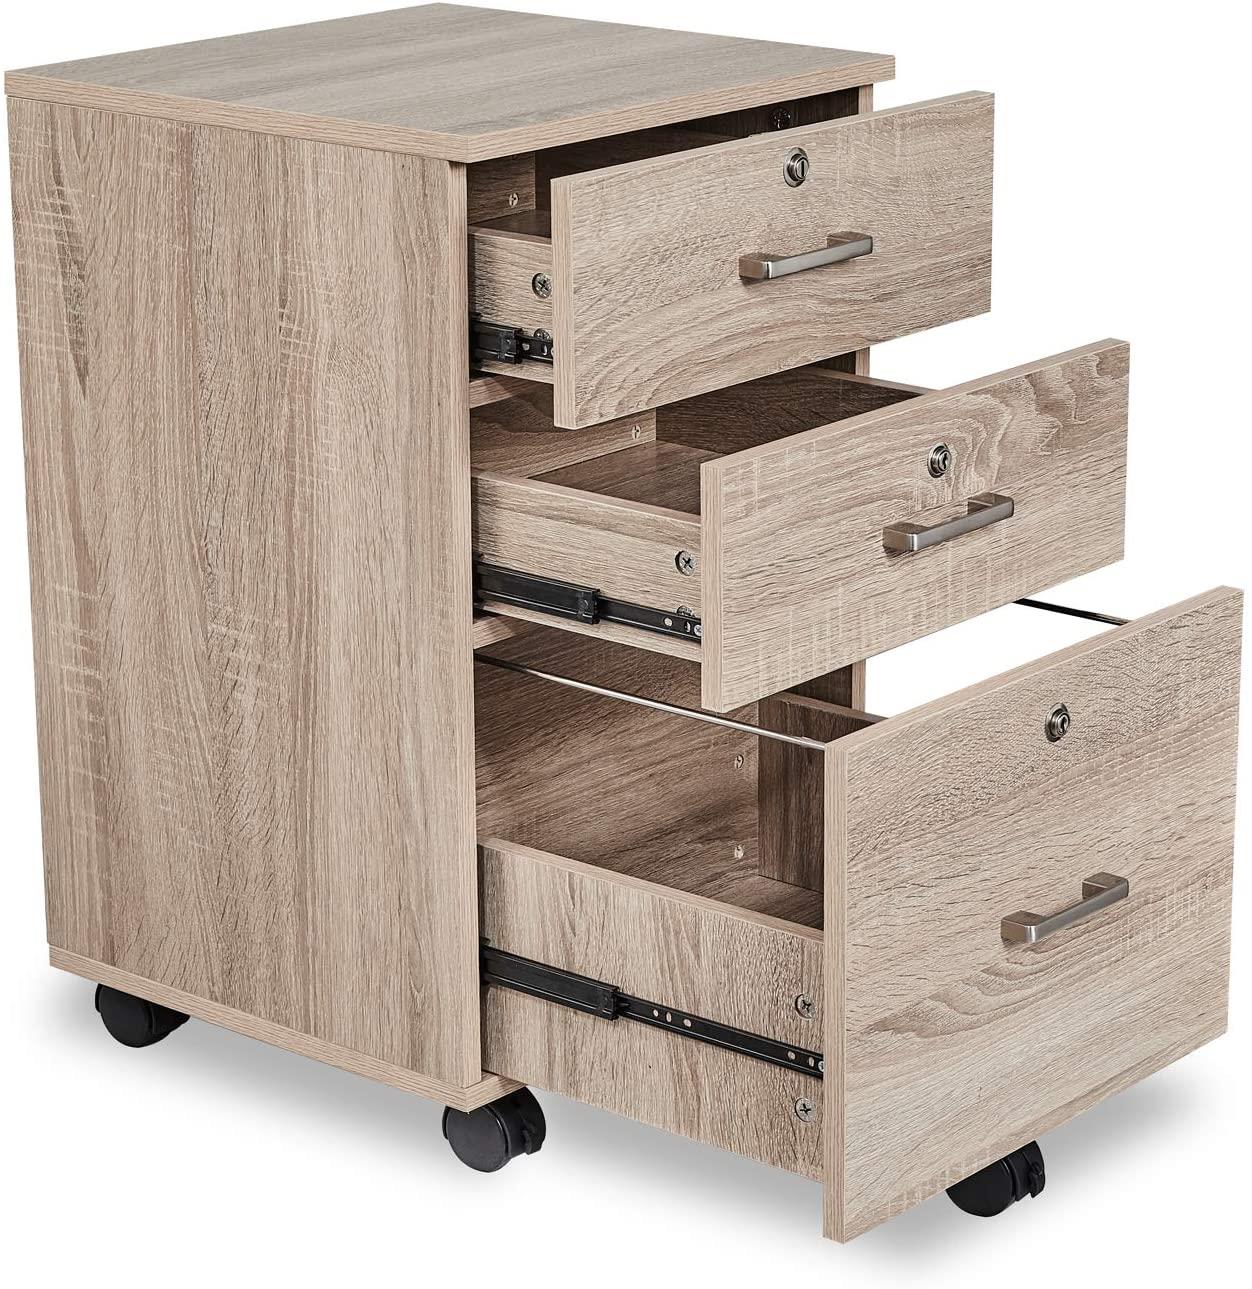 GoDecor 3-Drawer Rolling Wood File Cabinet with Lock,Oak - image 3 of 6